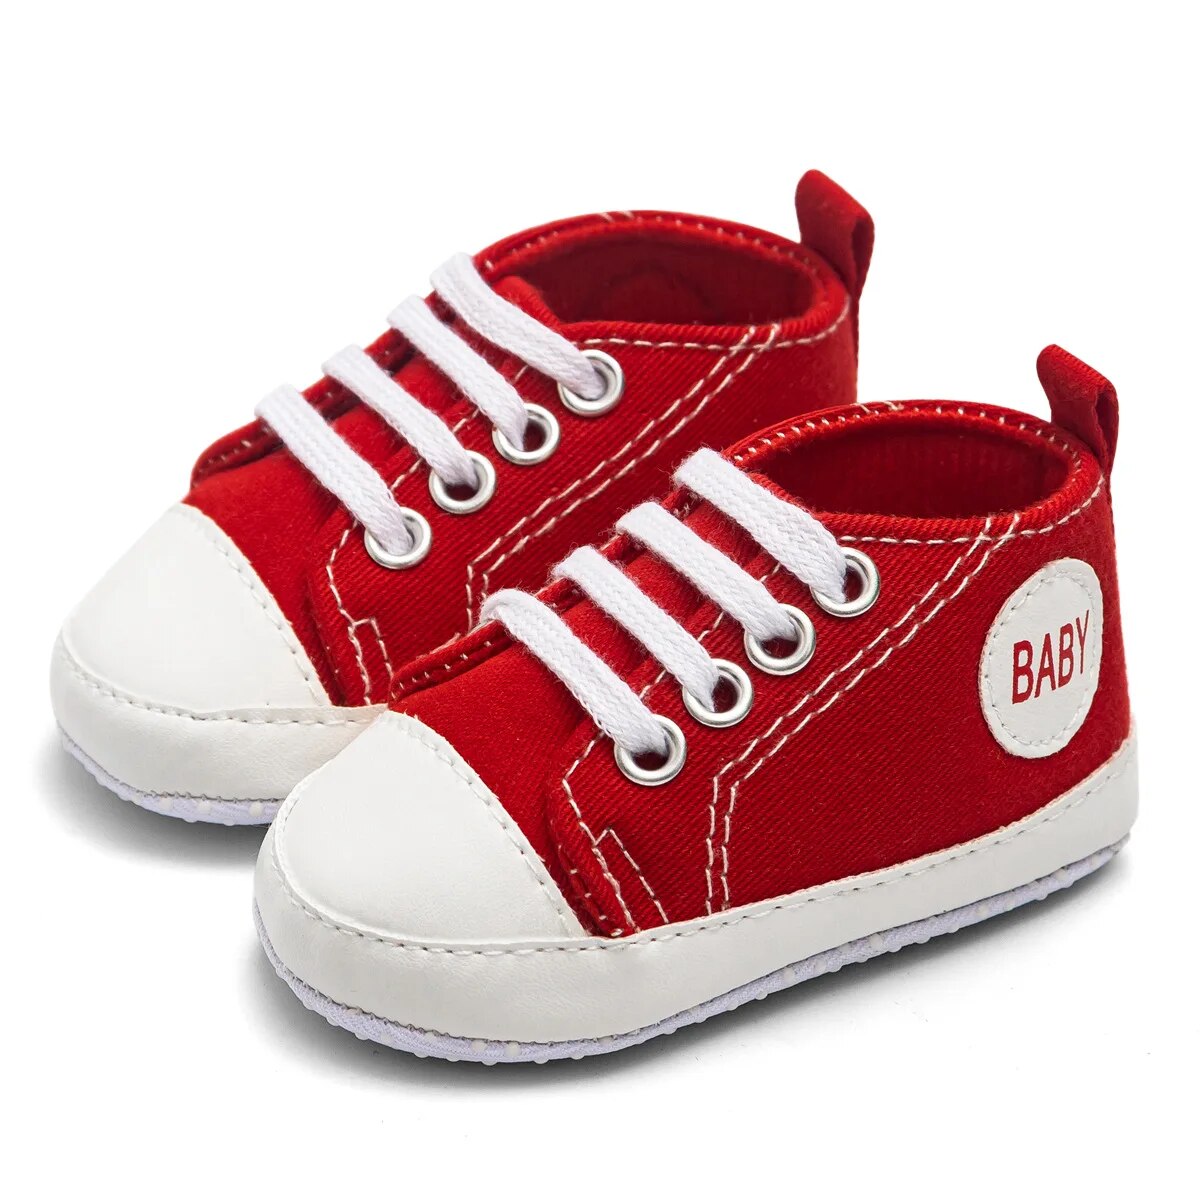 Baby Newborn Shoes Infant Boys Girl Sports Shoes Kid Crib Shoe Toddler Casual Soft Sole Anti-slip Children First Walkers Sneaker